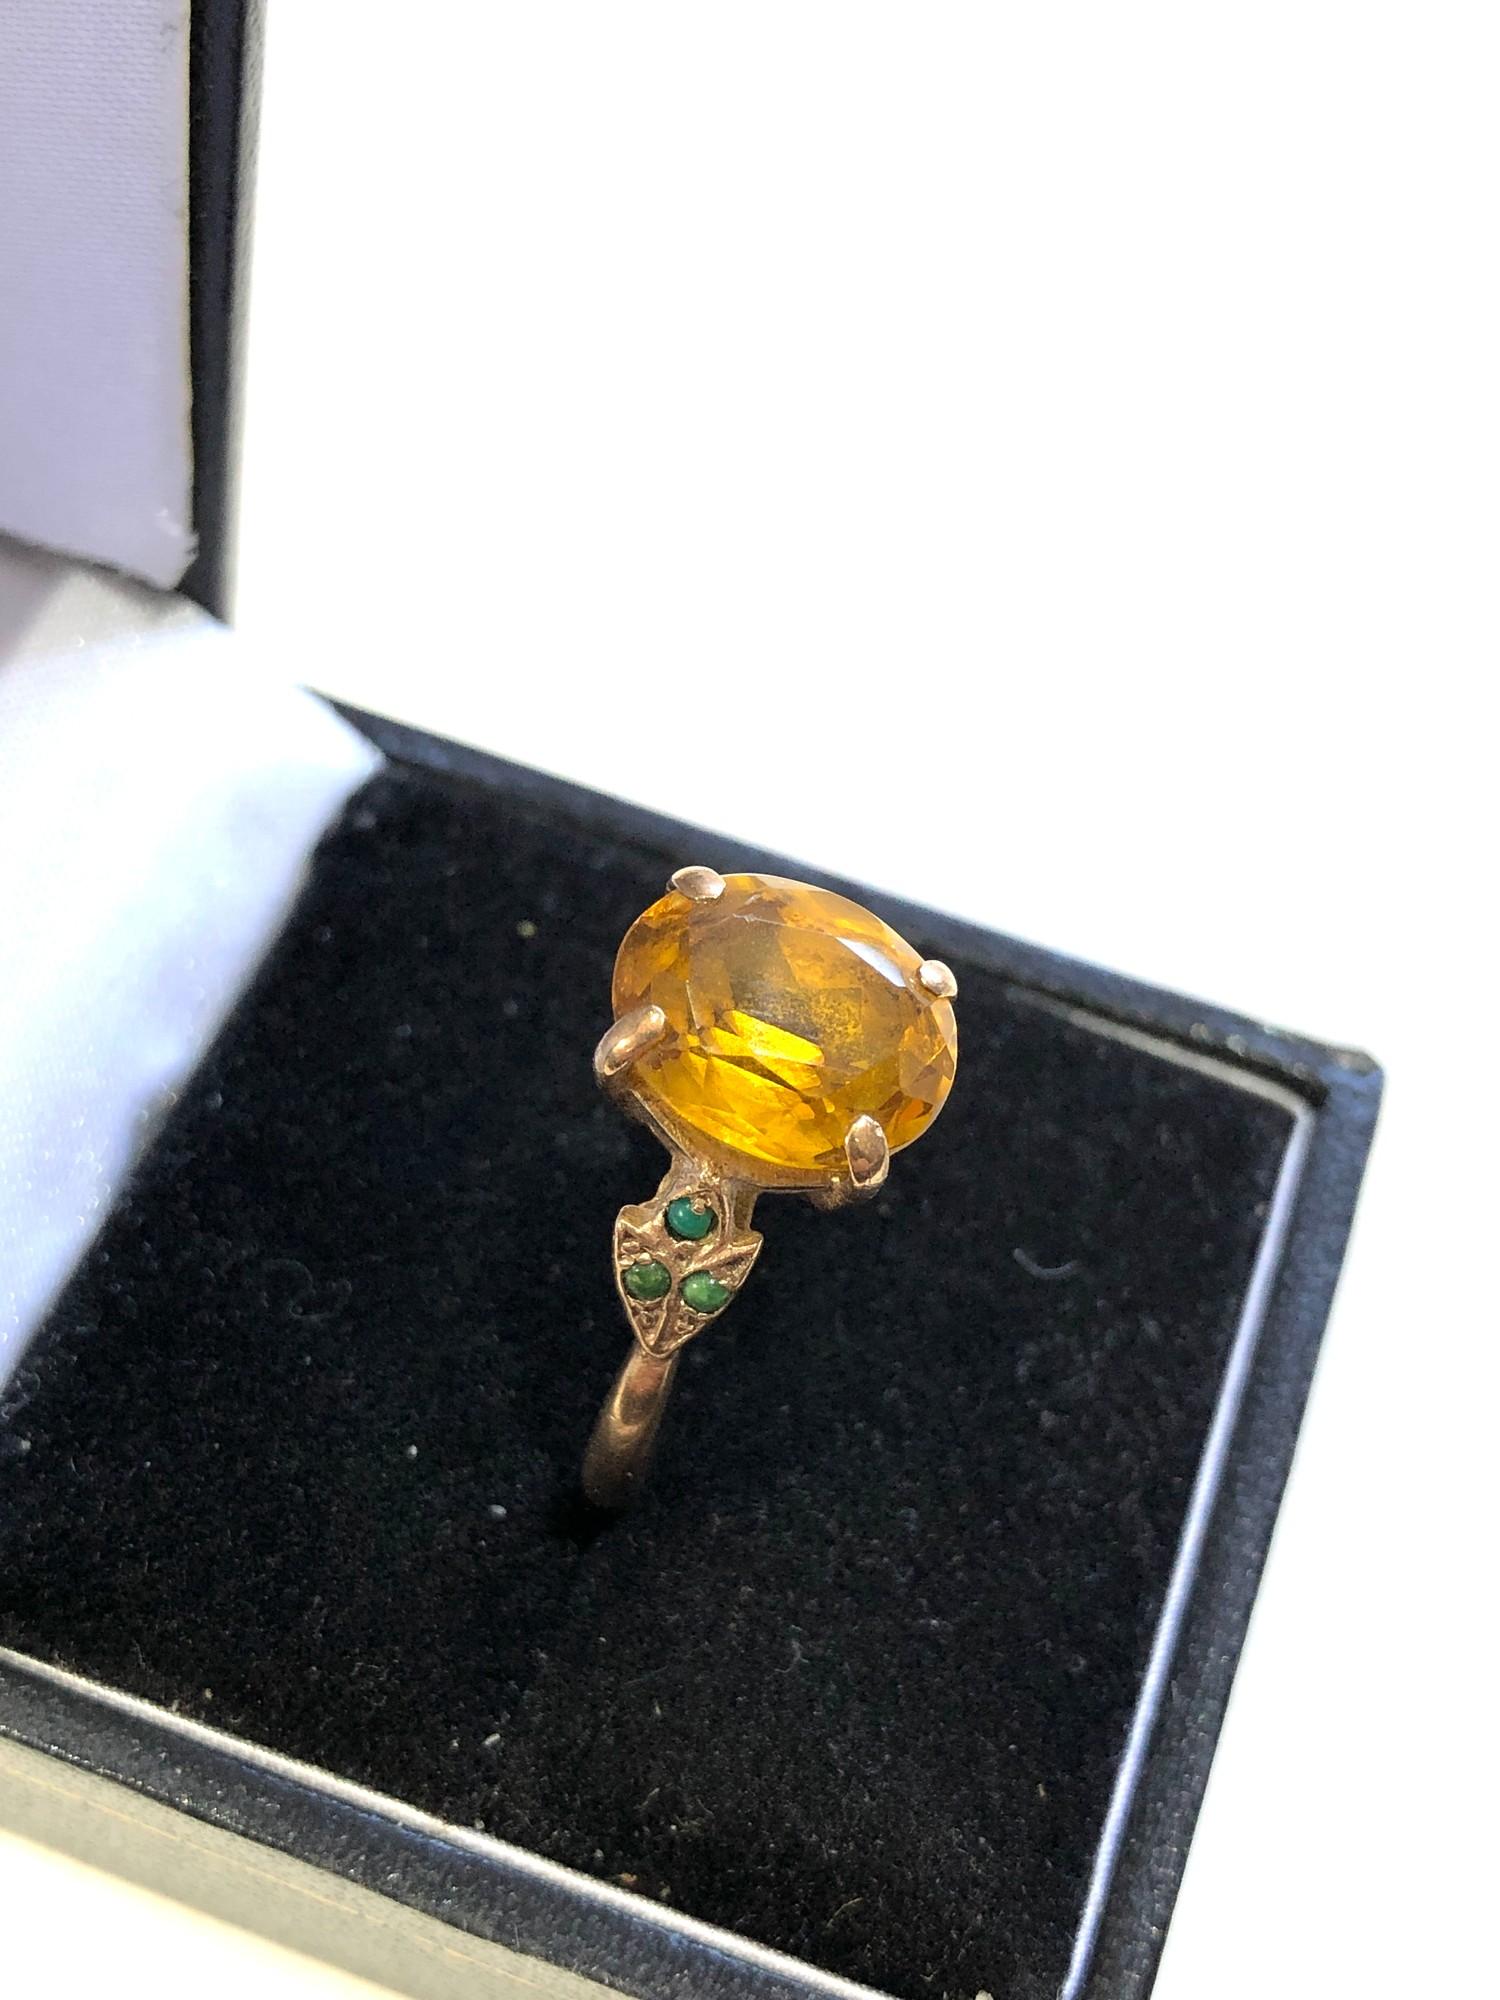 9ct gold synthetic yellow sapphire ring weight 4.5g - Image 2 of 4